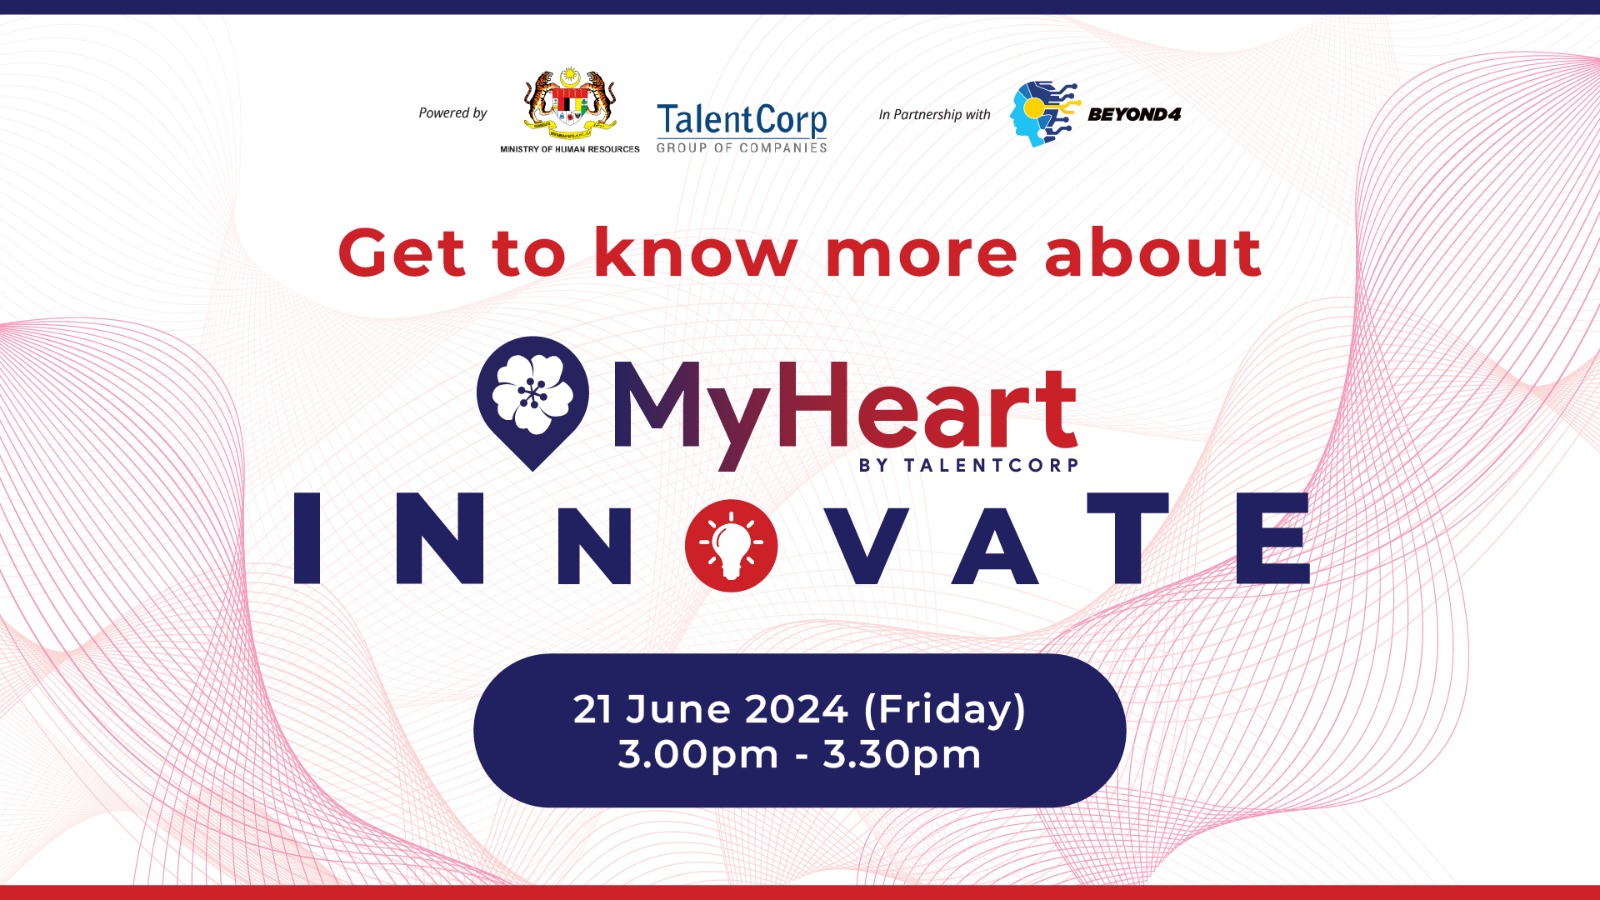 Get to Know More about MyHeart Innovate